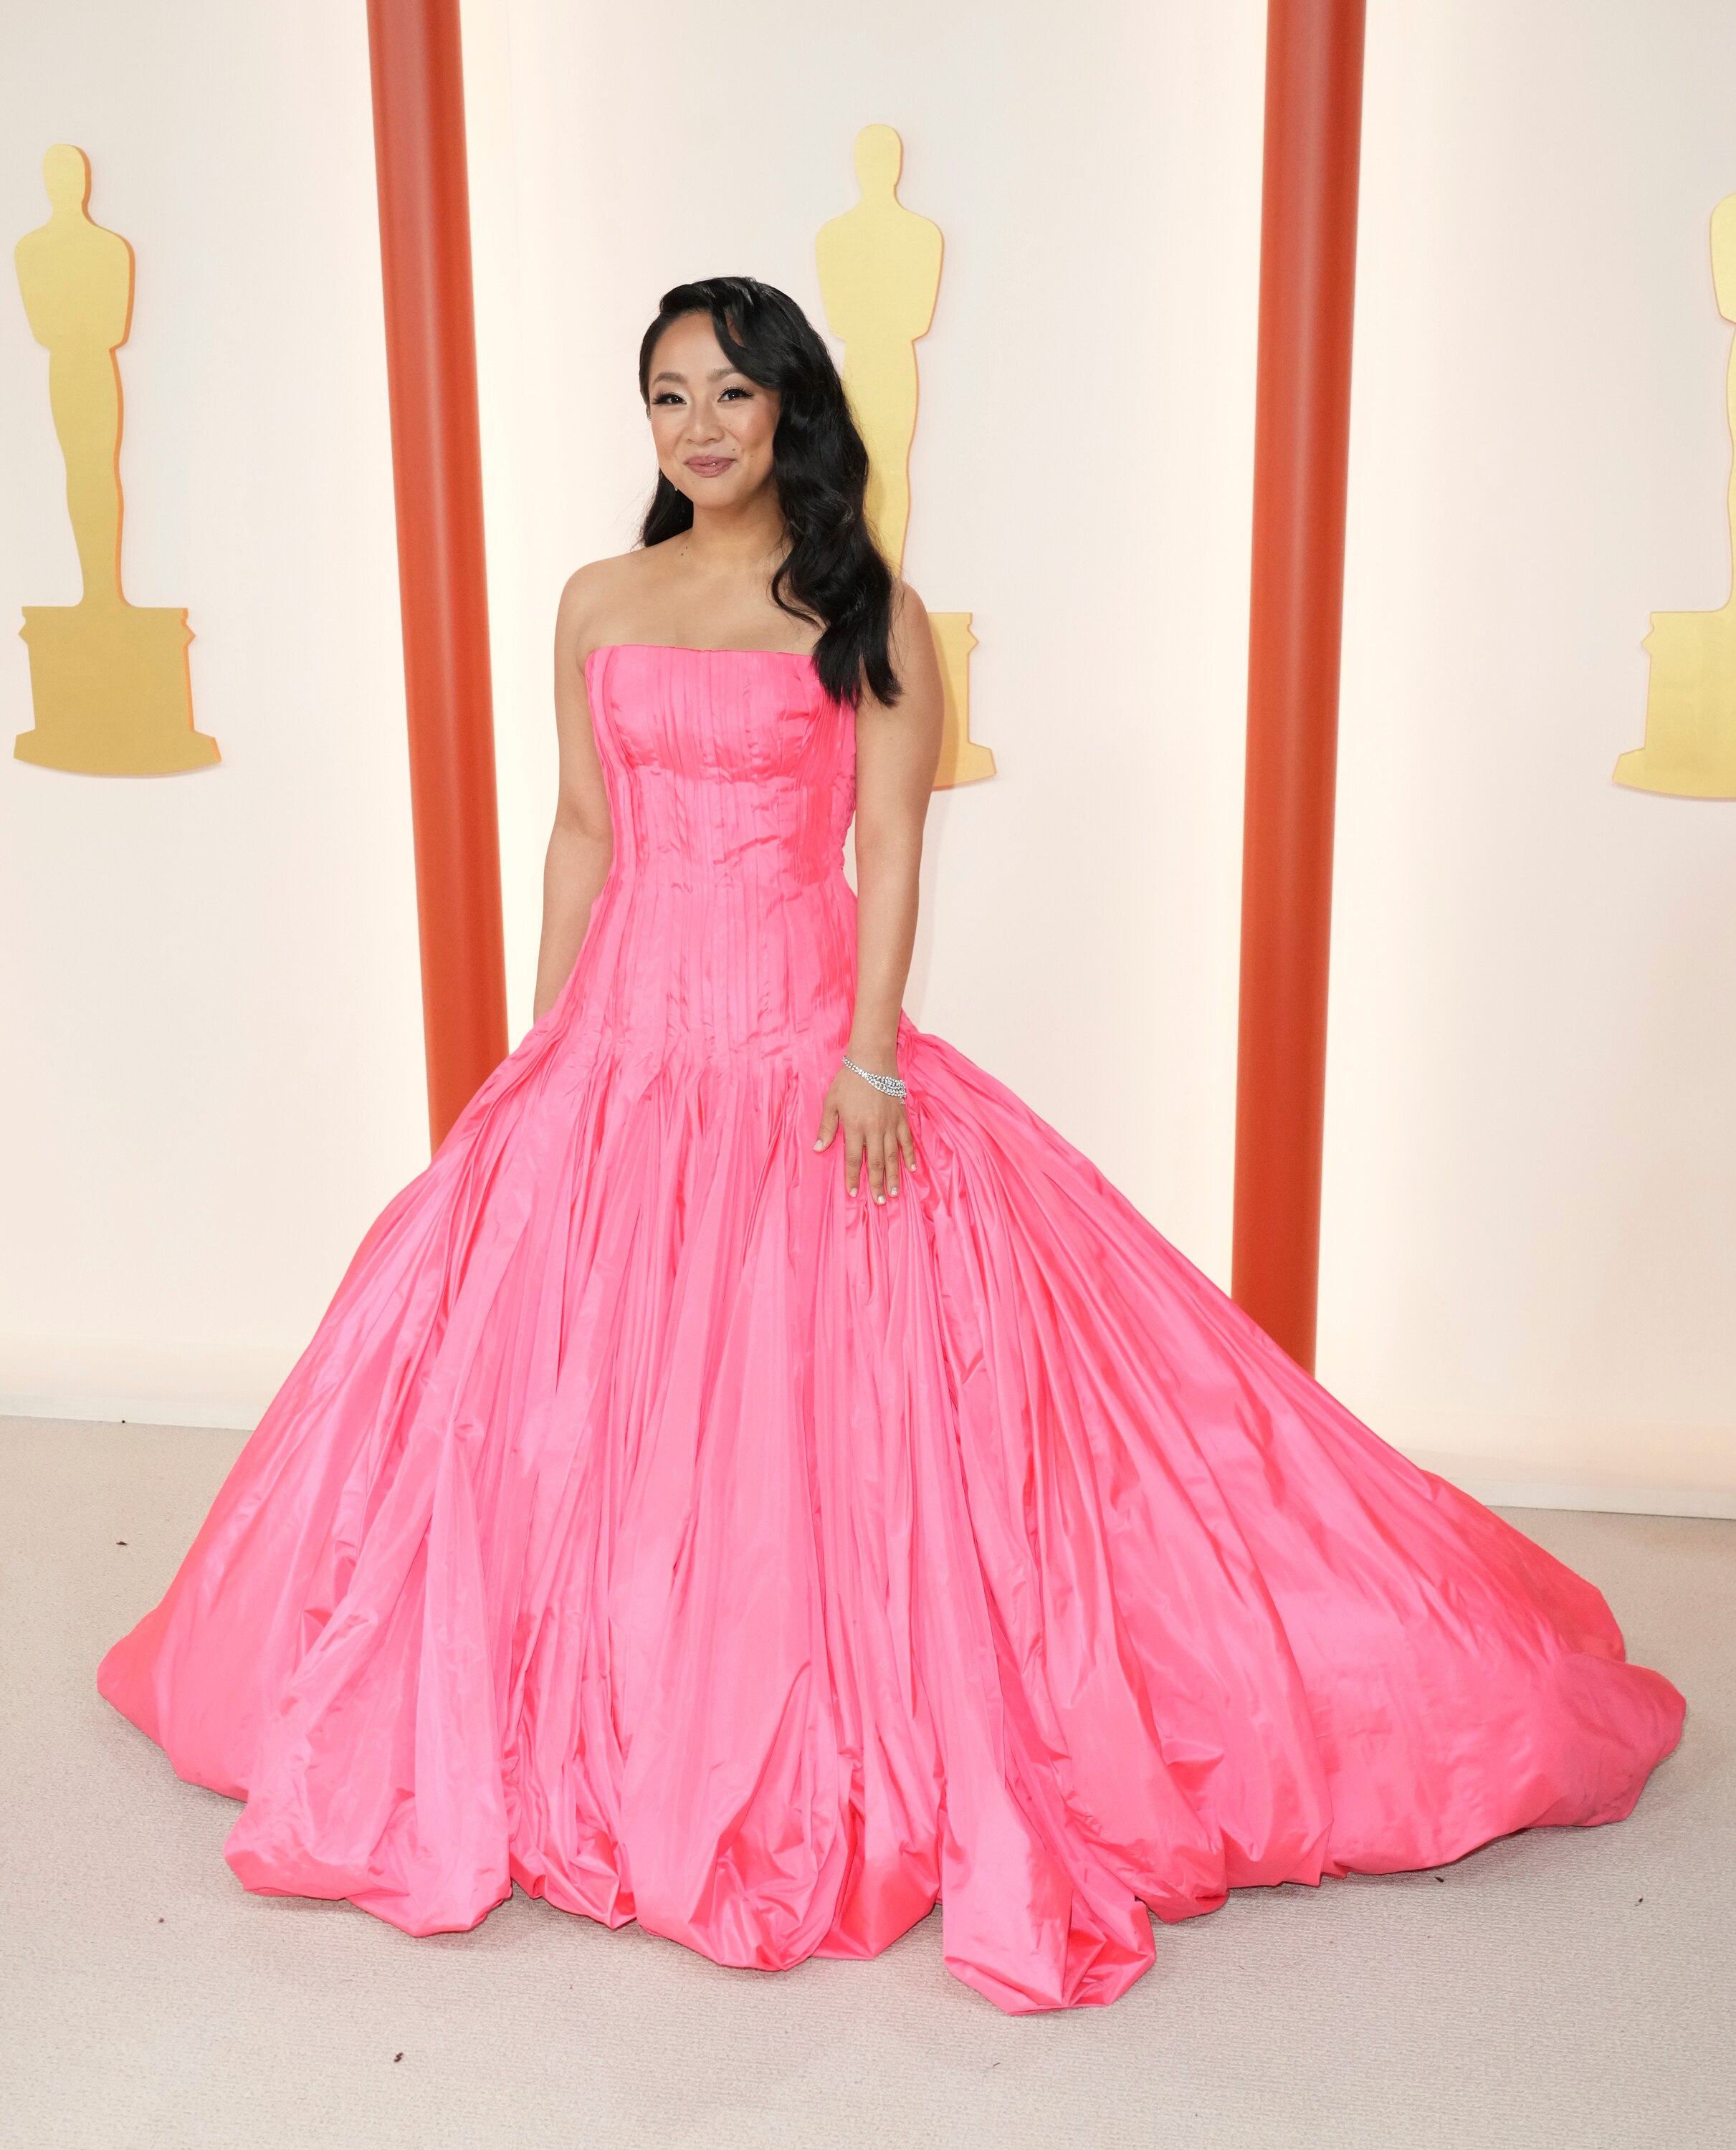 Stephanie Hsu wearing a bright pink strapless gown with a full skirt with lots of ruching